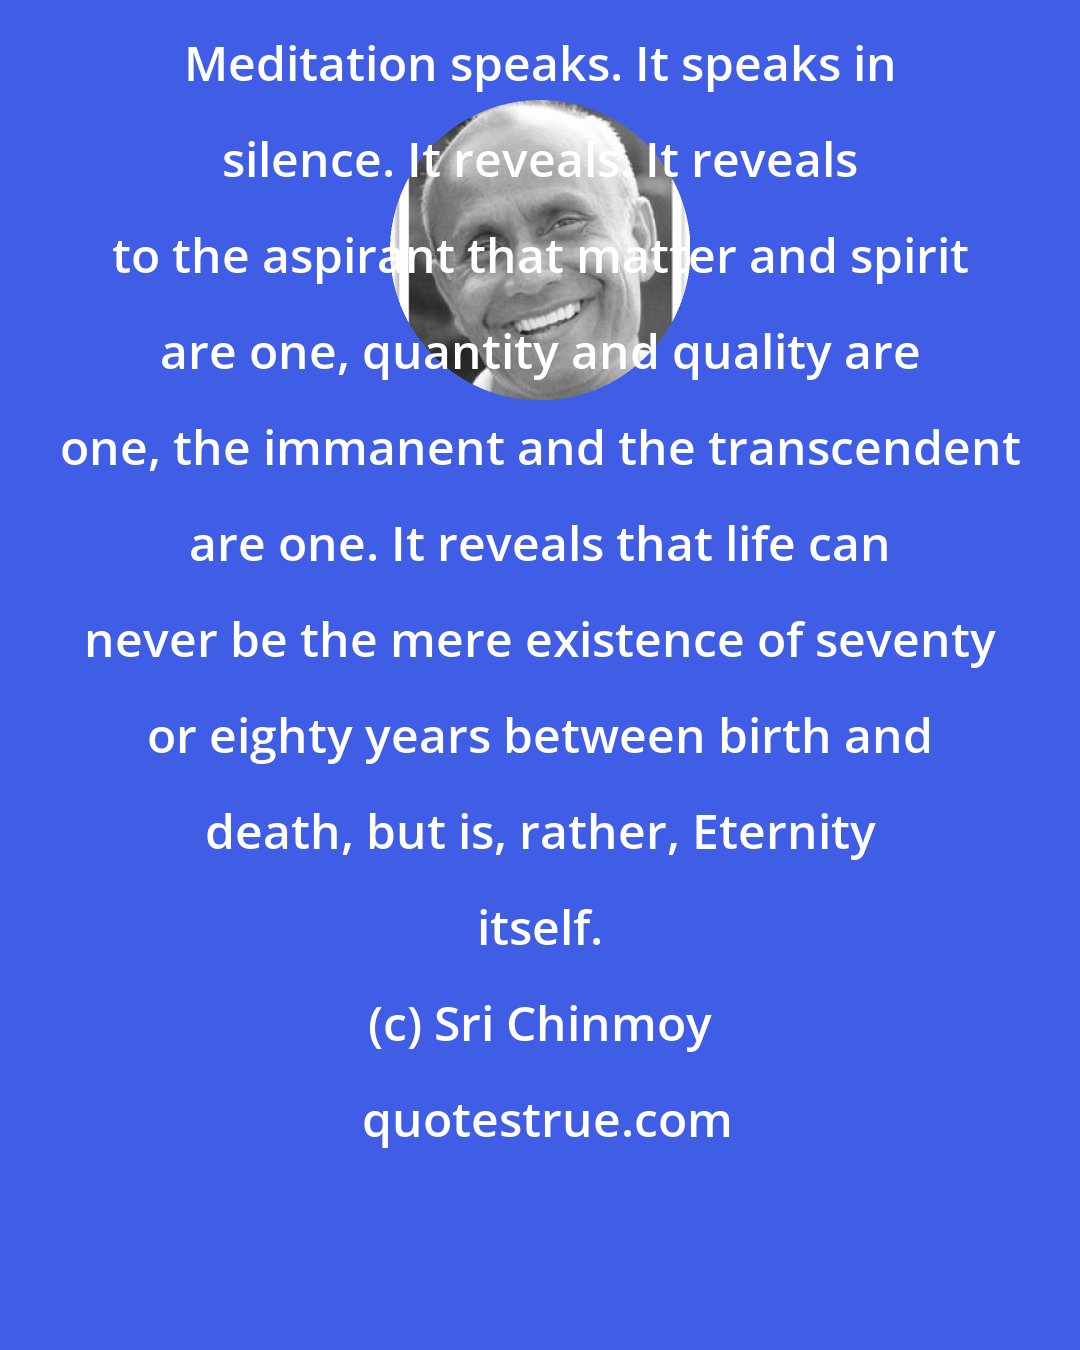 Sri Chinmoy: Meditation speaks. It speaks in silence. It reveals. It reveals to the aspirant that matter and spirit are one, quantity and quality are one, the immanent and the transcendent are one. It reveals that life can never be the mere existence of seventy or eighty years between birth and death, but is, rather, Eternity itself.